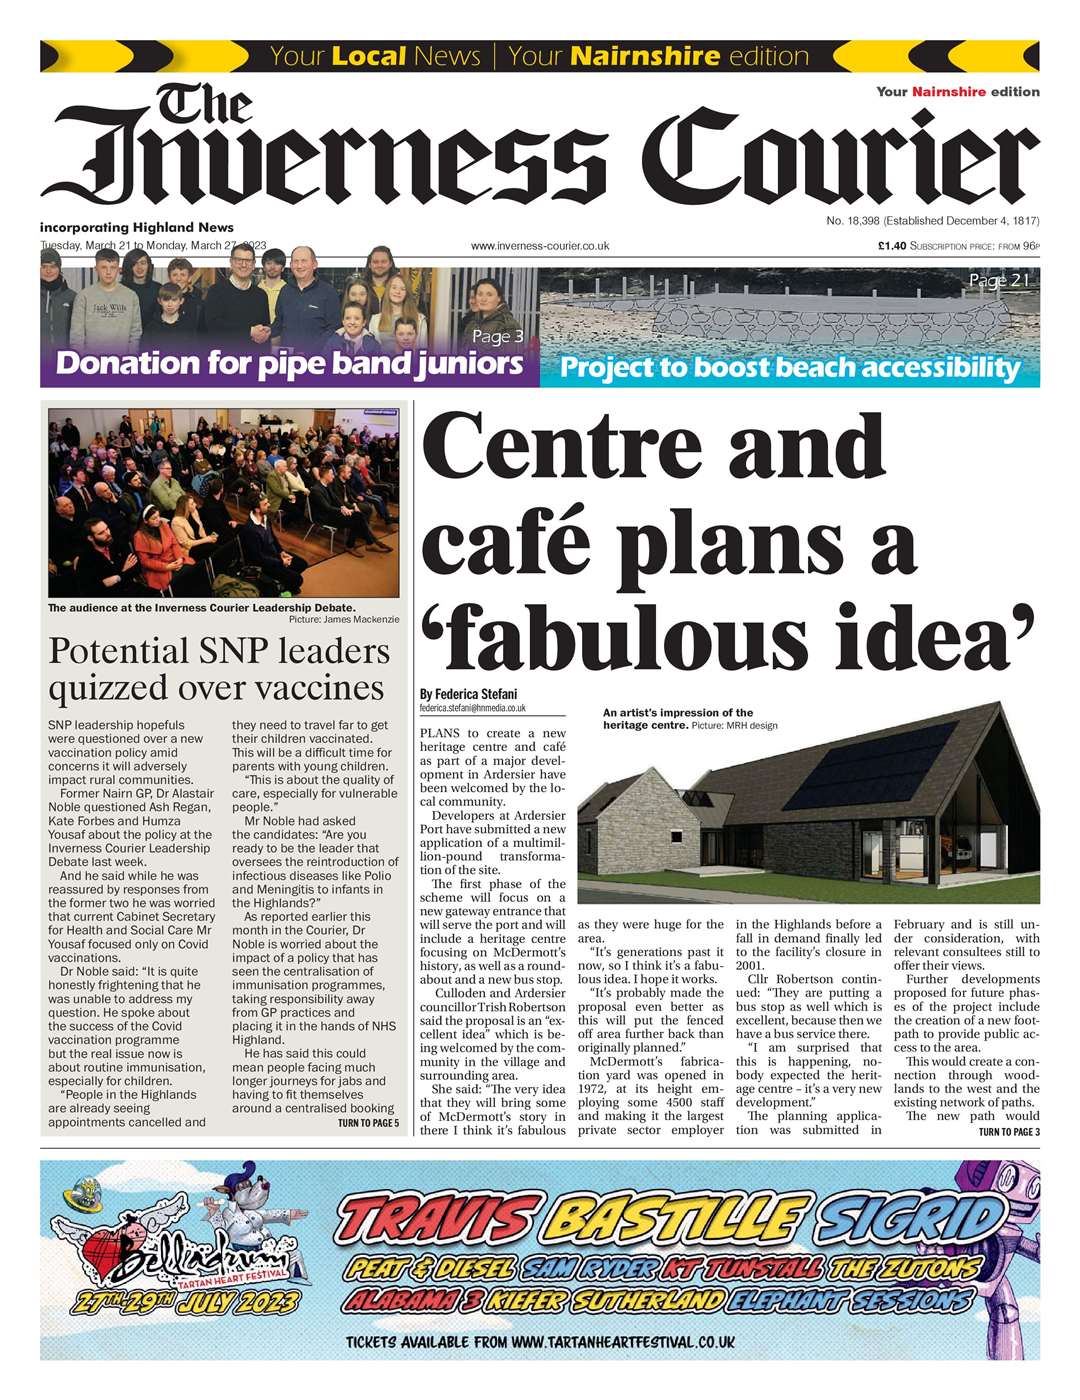 The Inverness Courier (Nairnshire edition), March 21, front page.